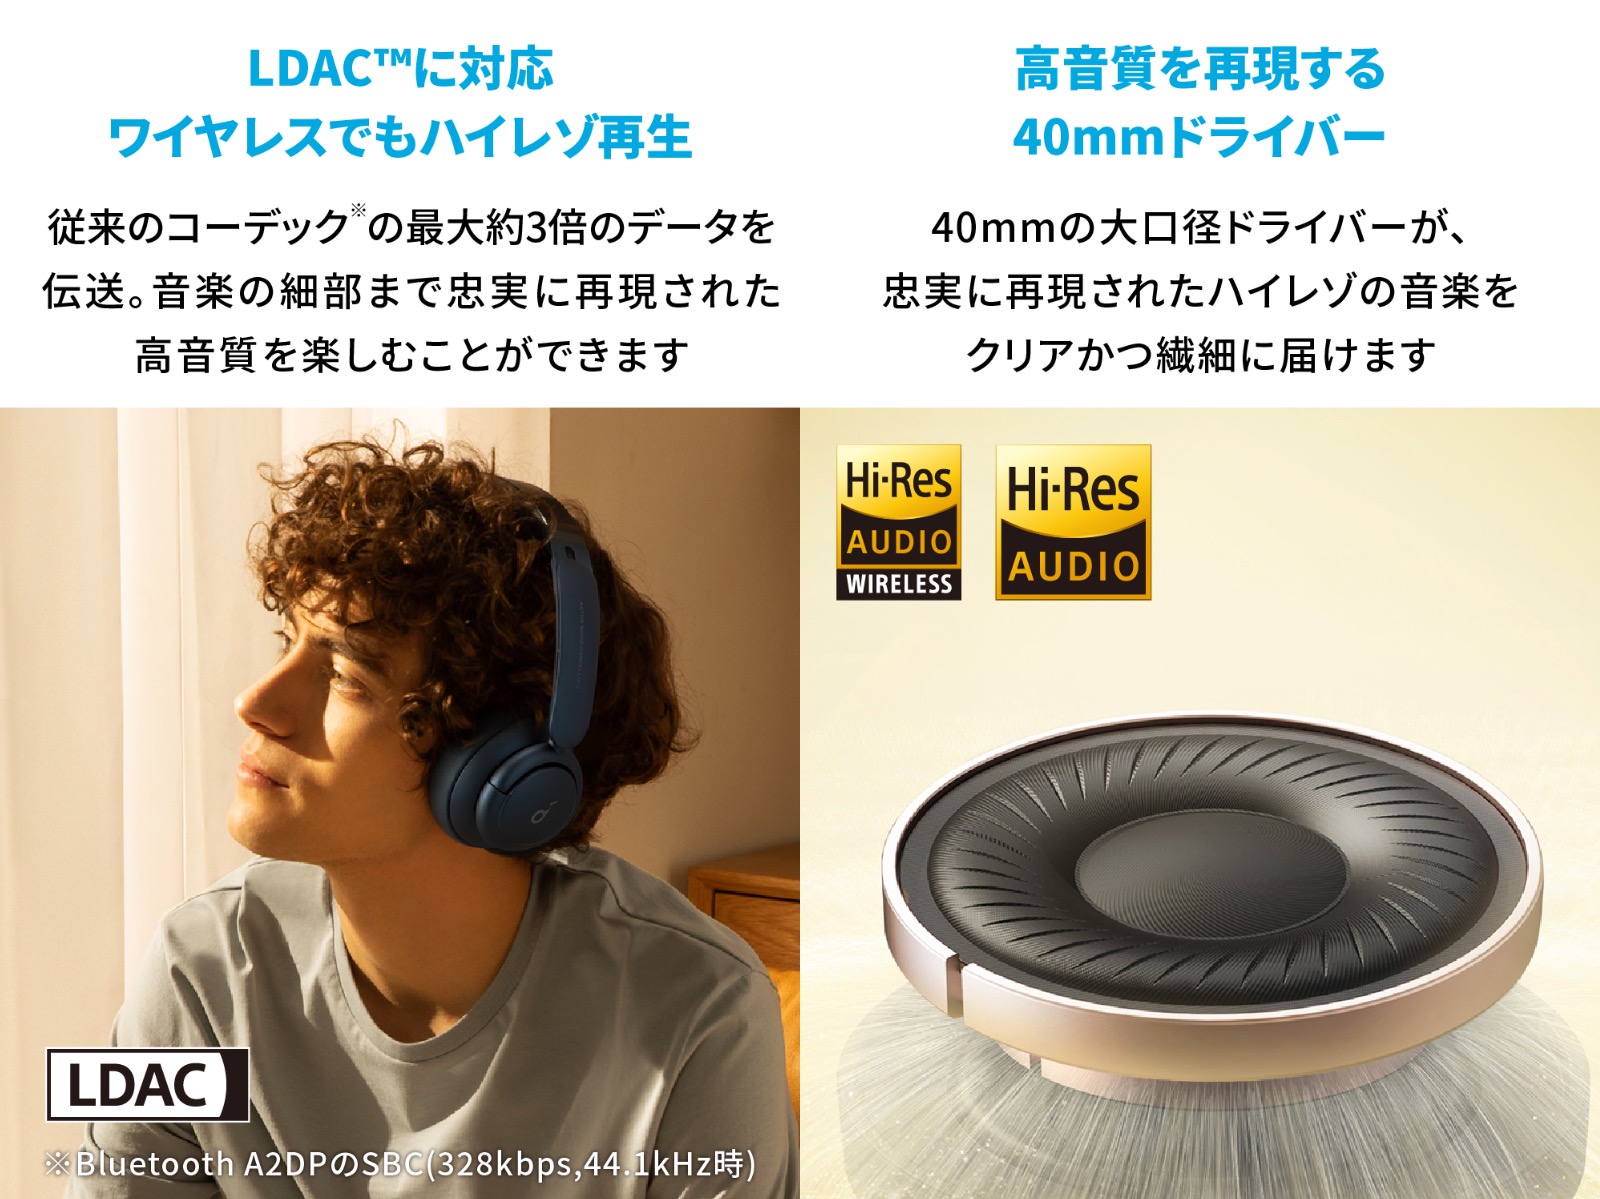 Anker Soundcore Life Q35 LDAC and 40mm driver